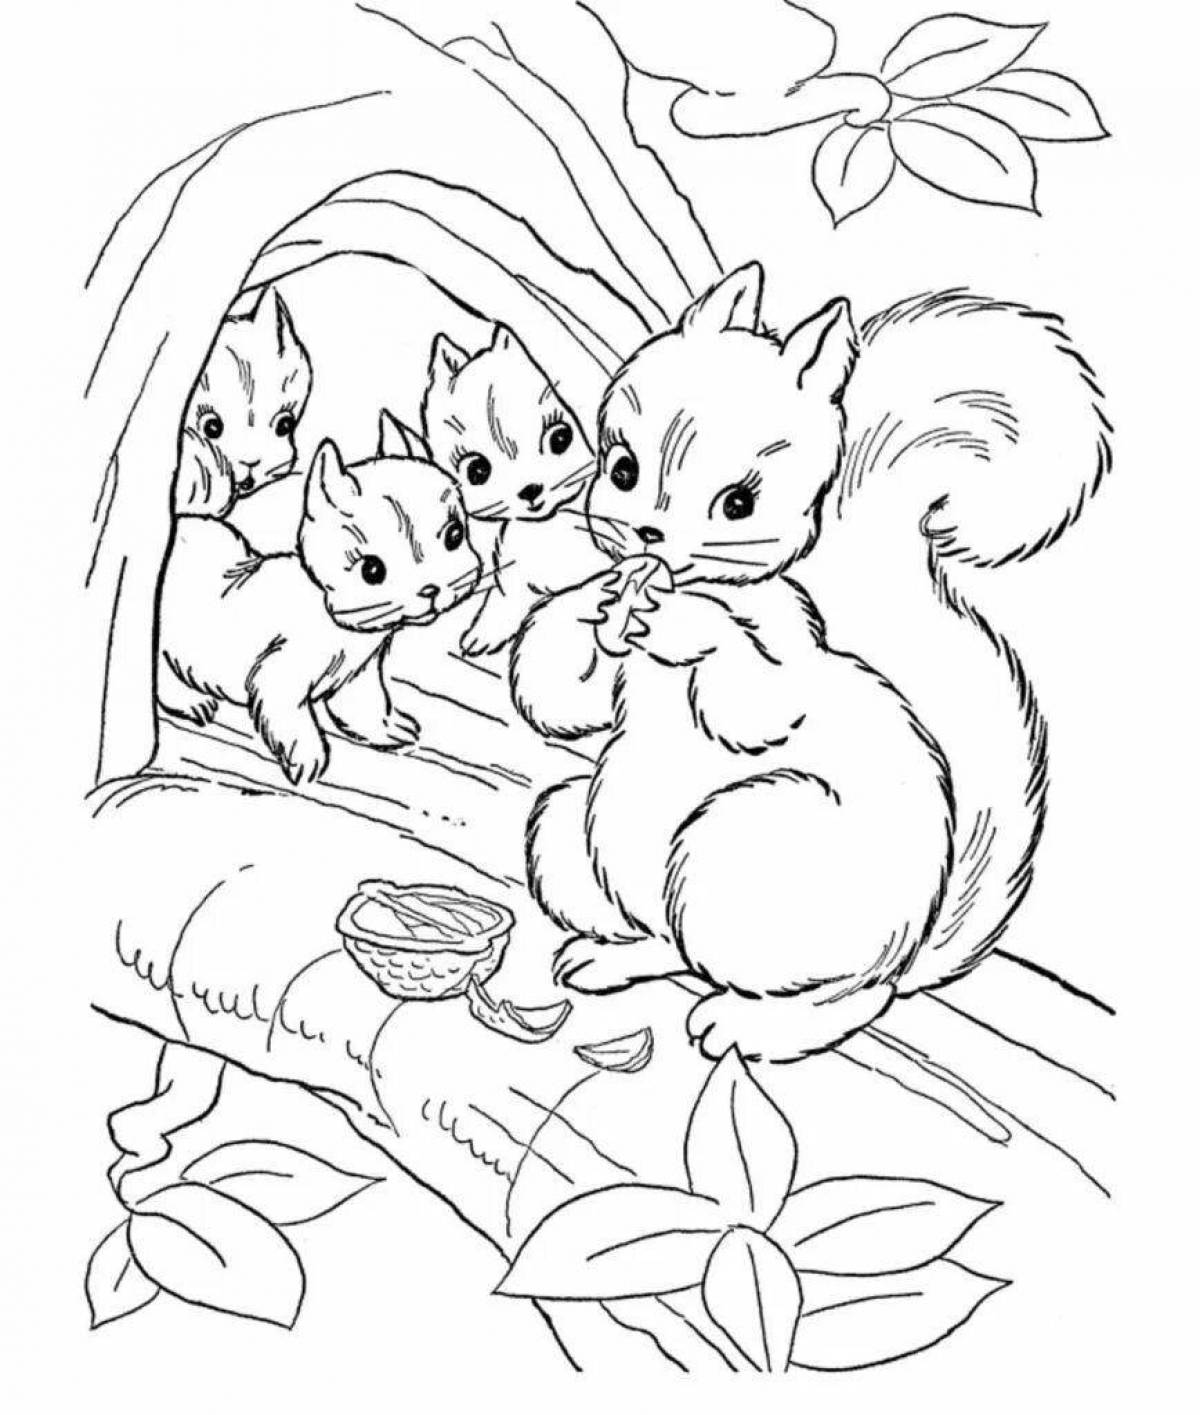 Vibrant forest animal coloring pages for kids